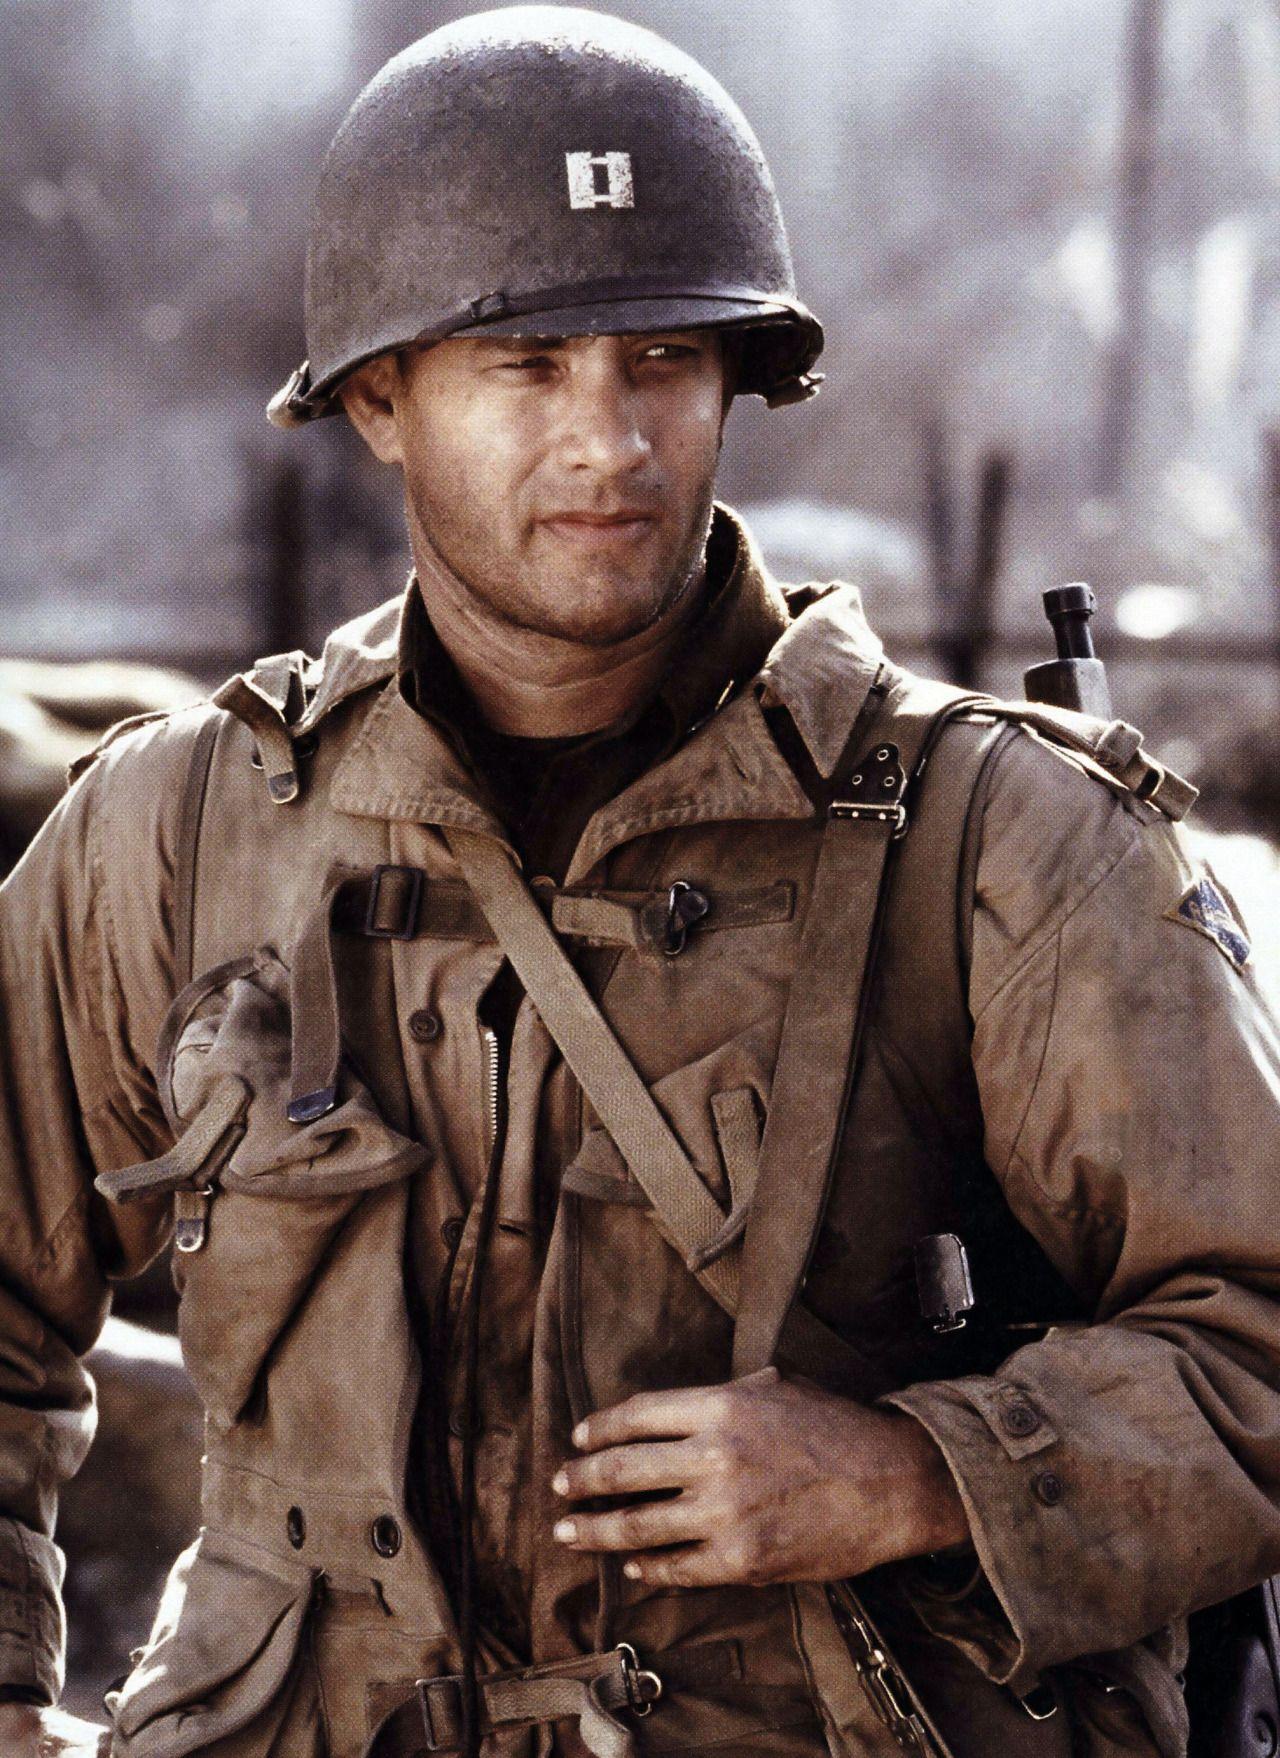 Tom Hanks in Saving Private Ryan Almost everything this man stars